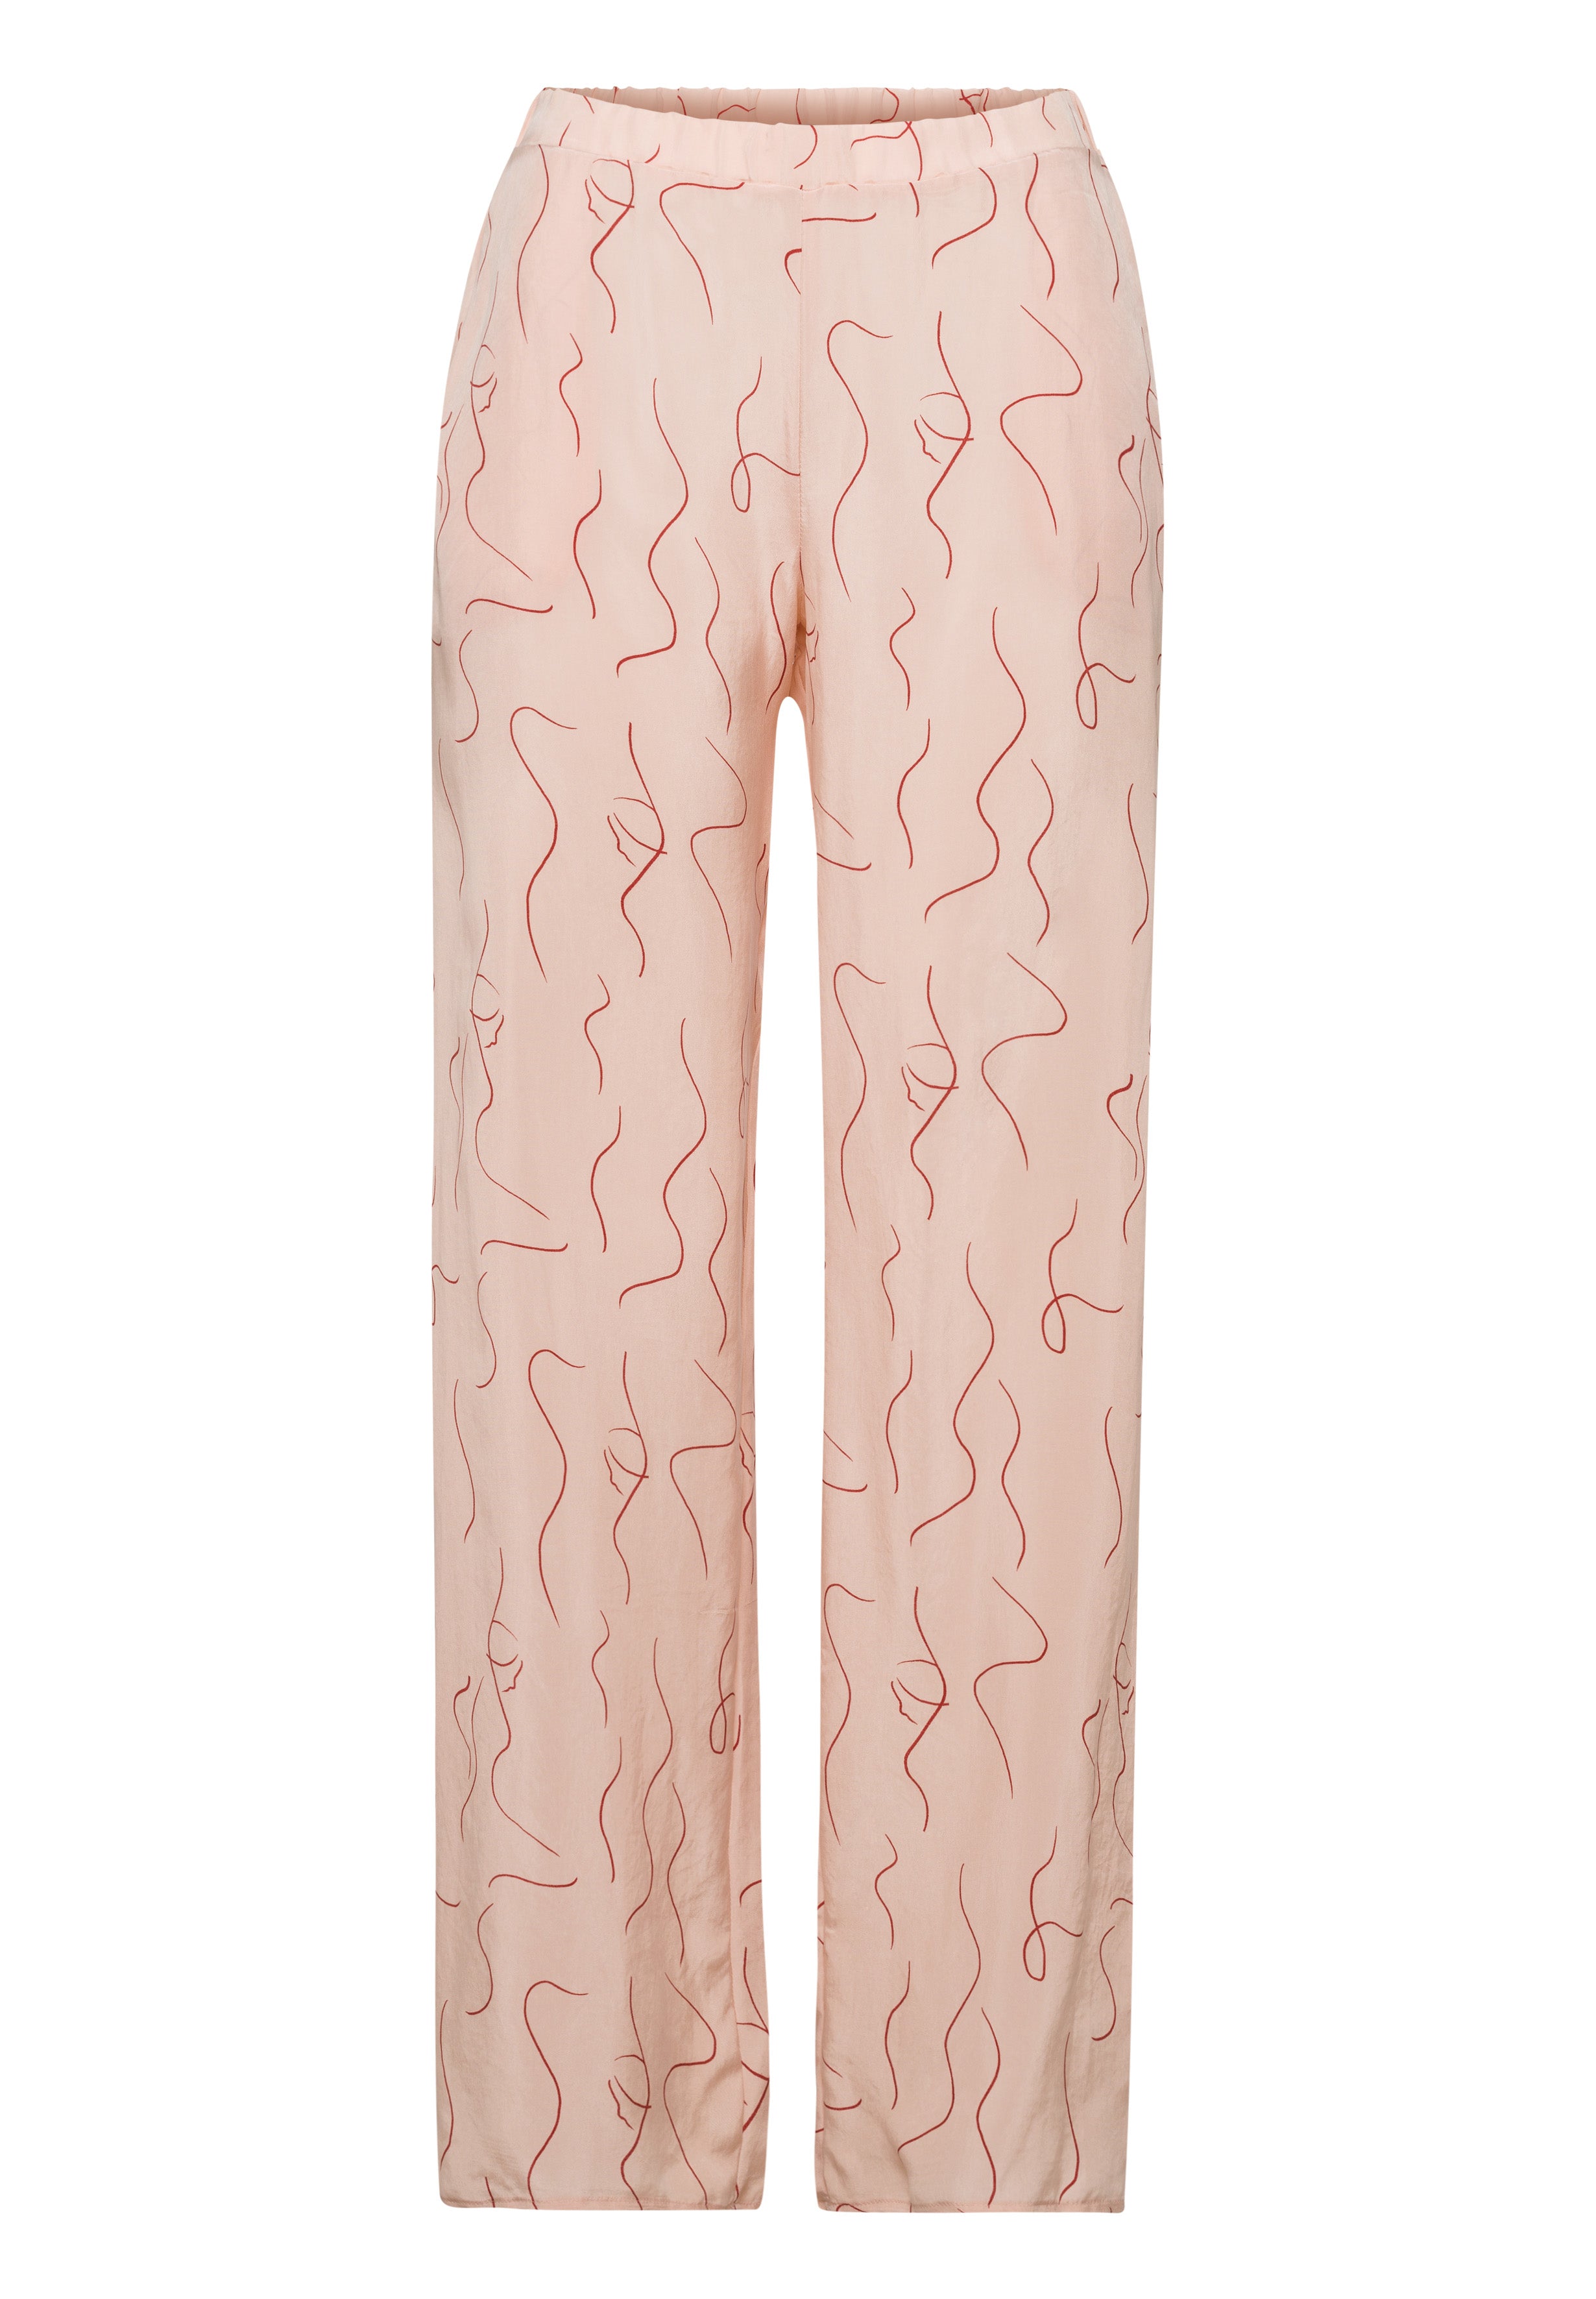 76827 Lille Woven Pants - 2067 Pstl Art Iced Apricot